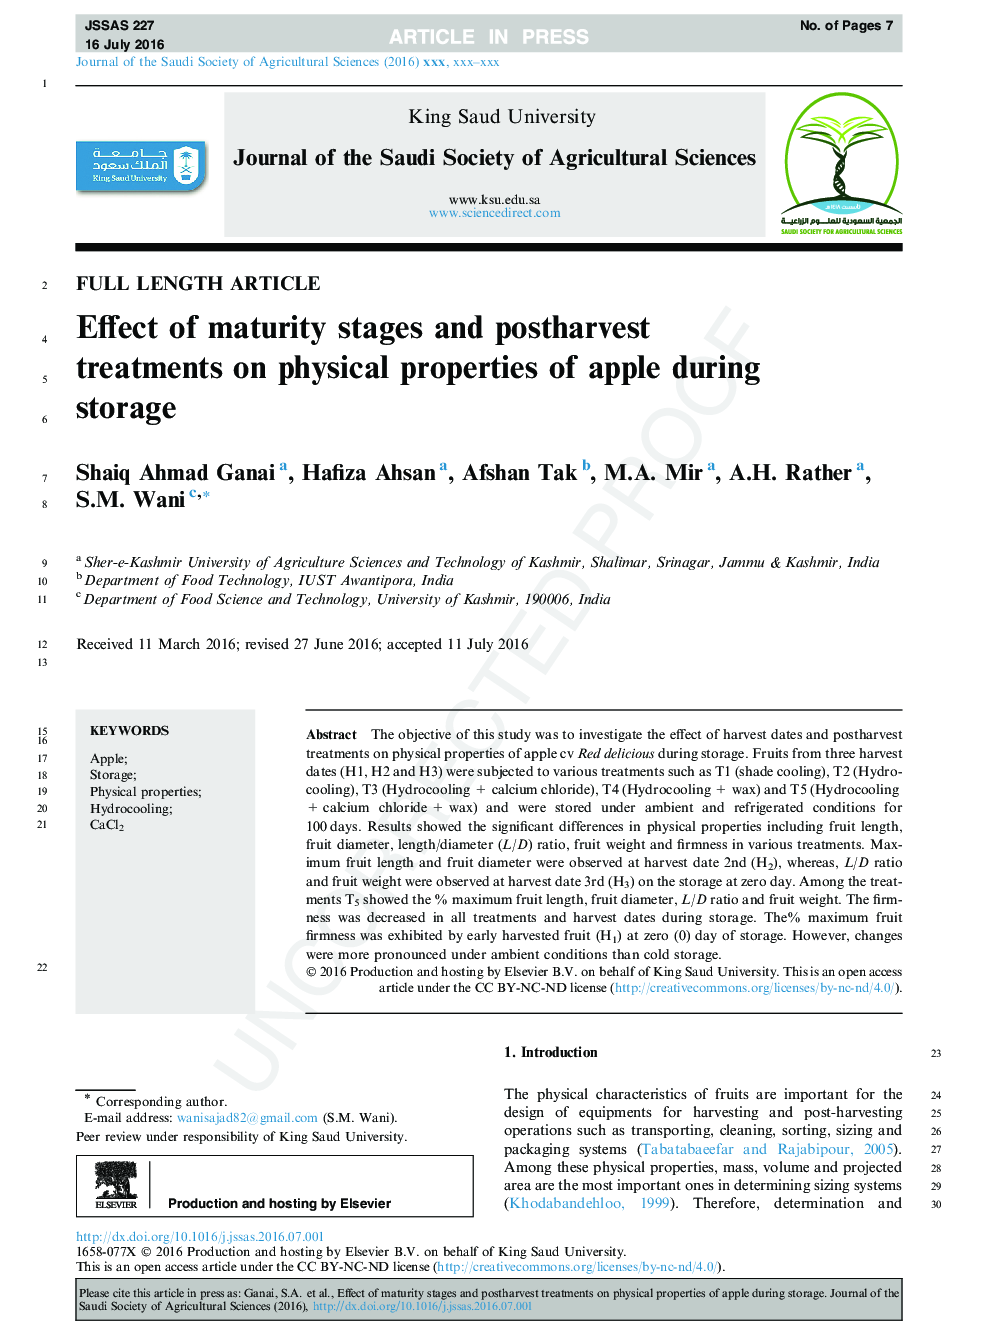 Effect of maturity stages and postharvest treatments on physical properties of apple during storage